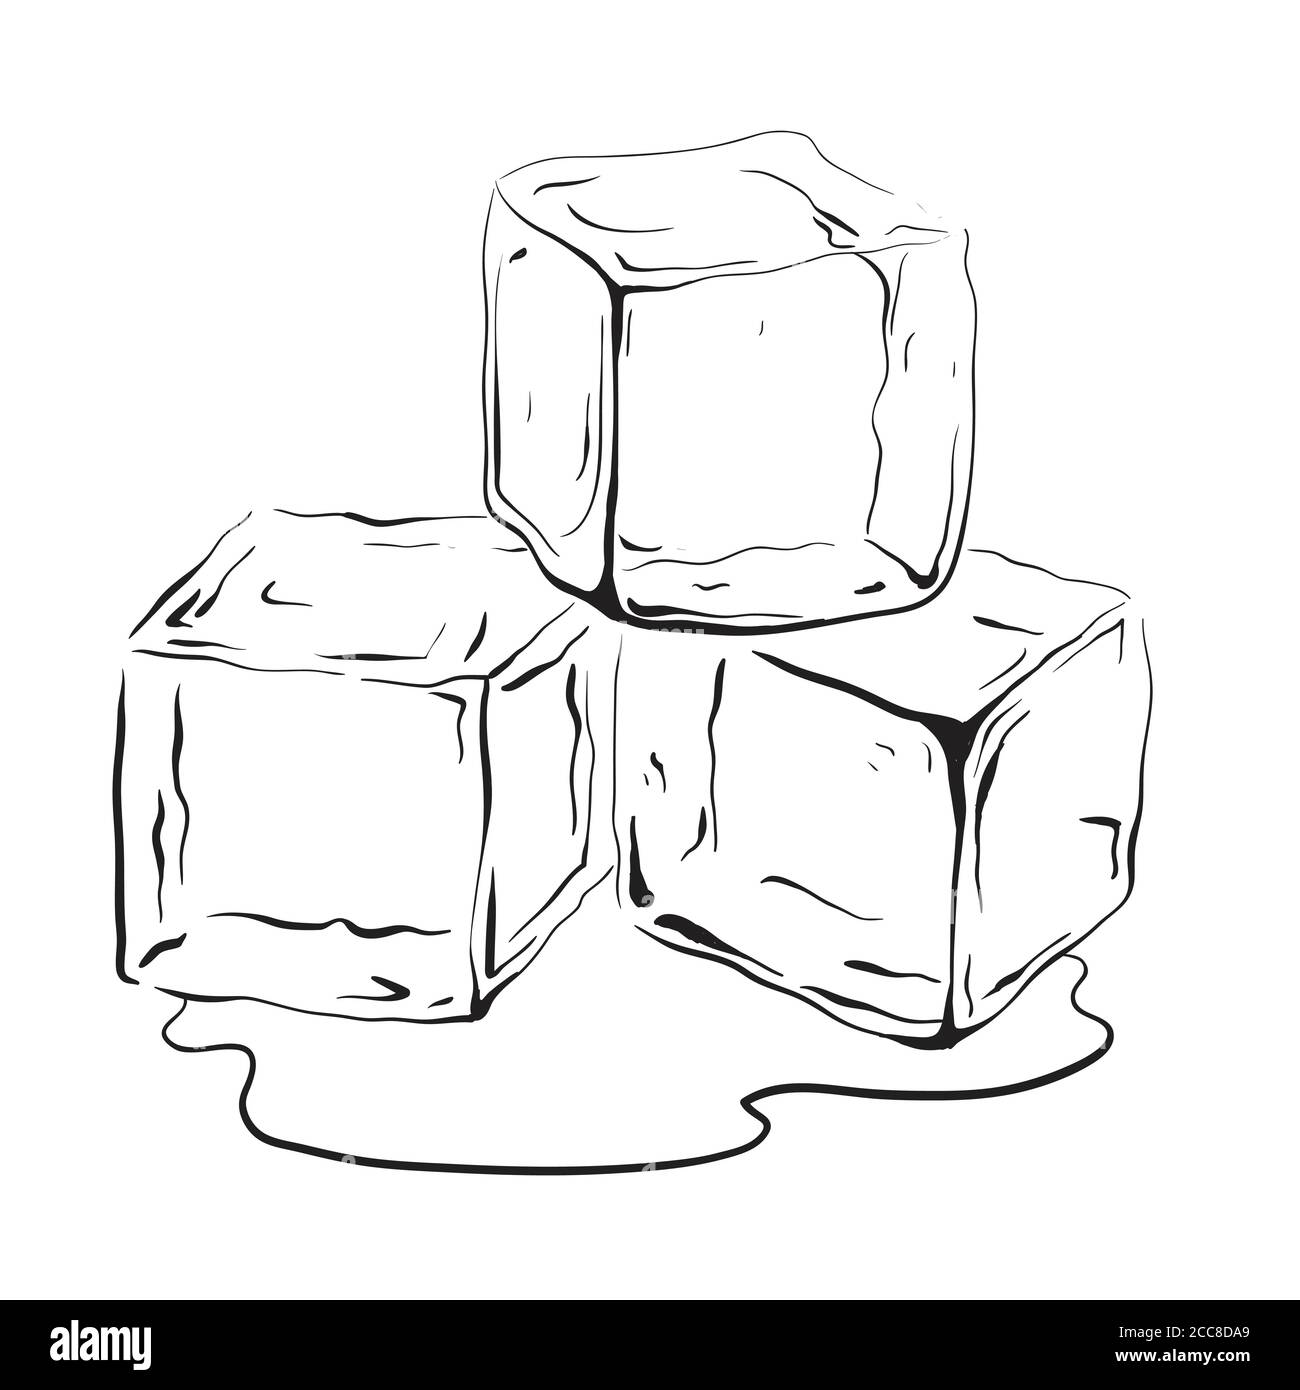 ice cube water clipart black